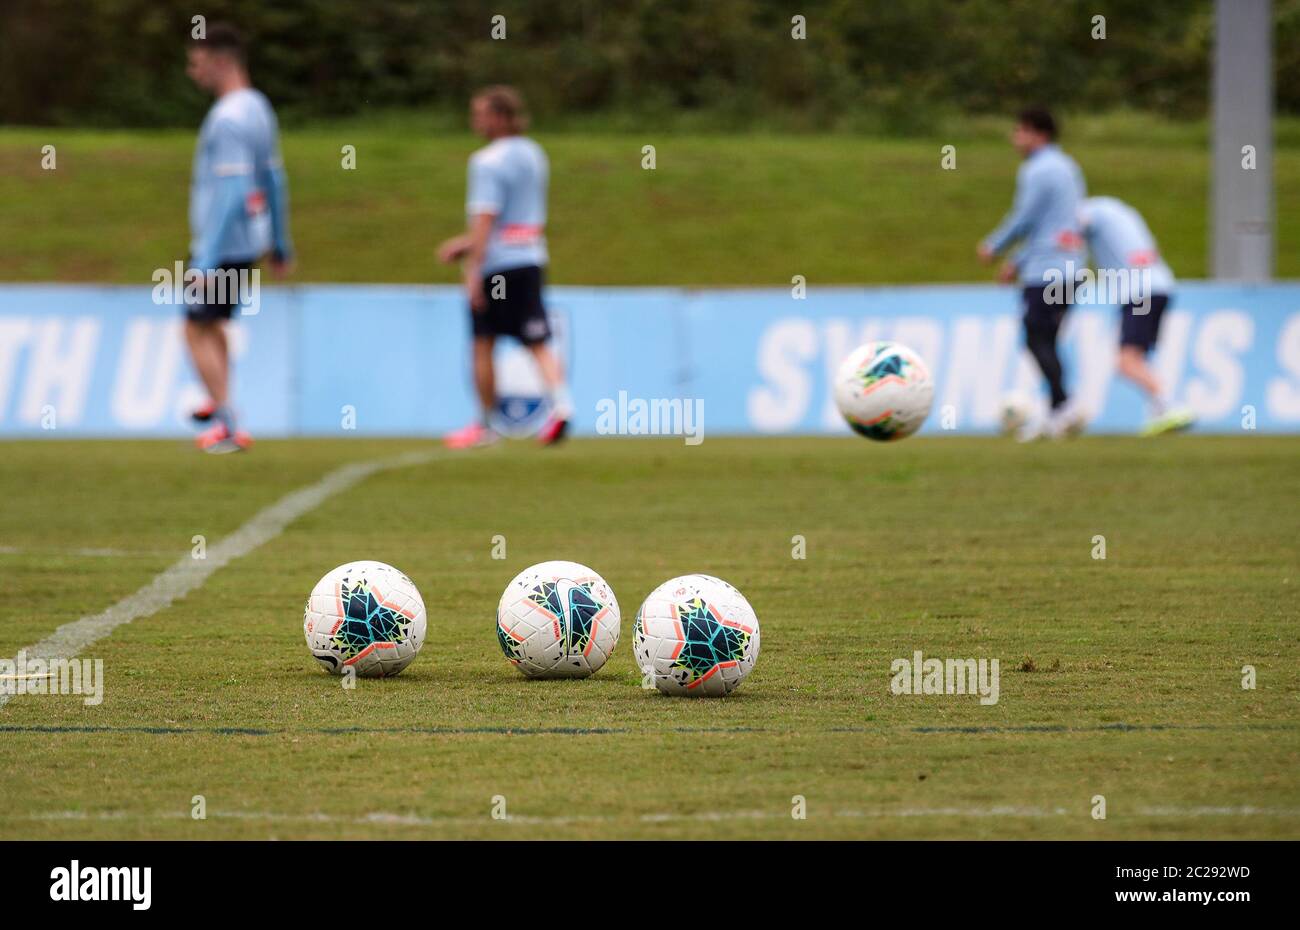 Sydney, Australia. 17th June, 2020. Players of Sydney FC attend a training session at Macquarie University in Sydney, Australia, on June 17, 2020. Australia's highest-level professional men's soccer league A-league is set to resume on July 16 with Melbourne Victory taking on Western United at AAMI Park in Melbourne. Credit: Bai Xuefei/Xinhua/Alamy Live News Stock Photo